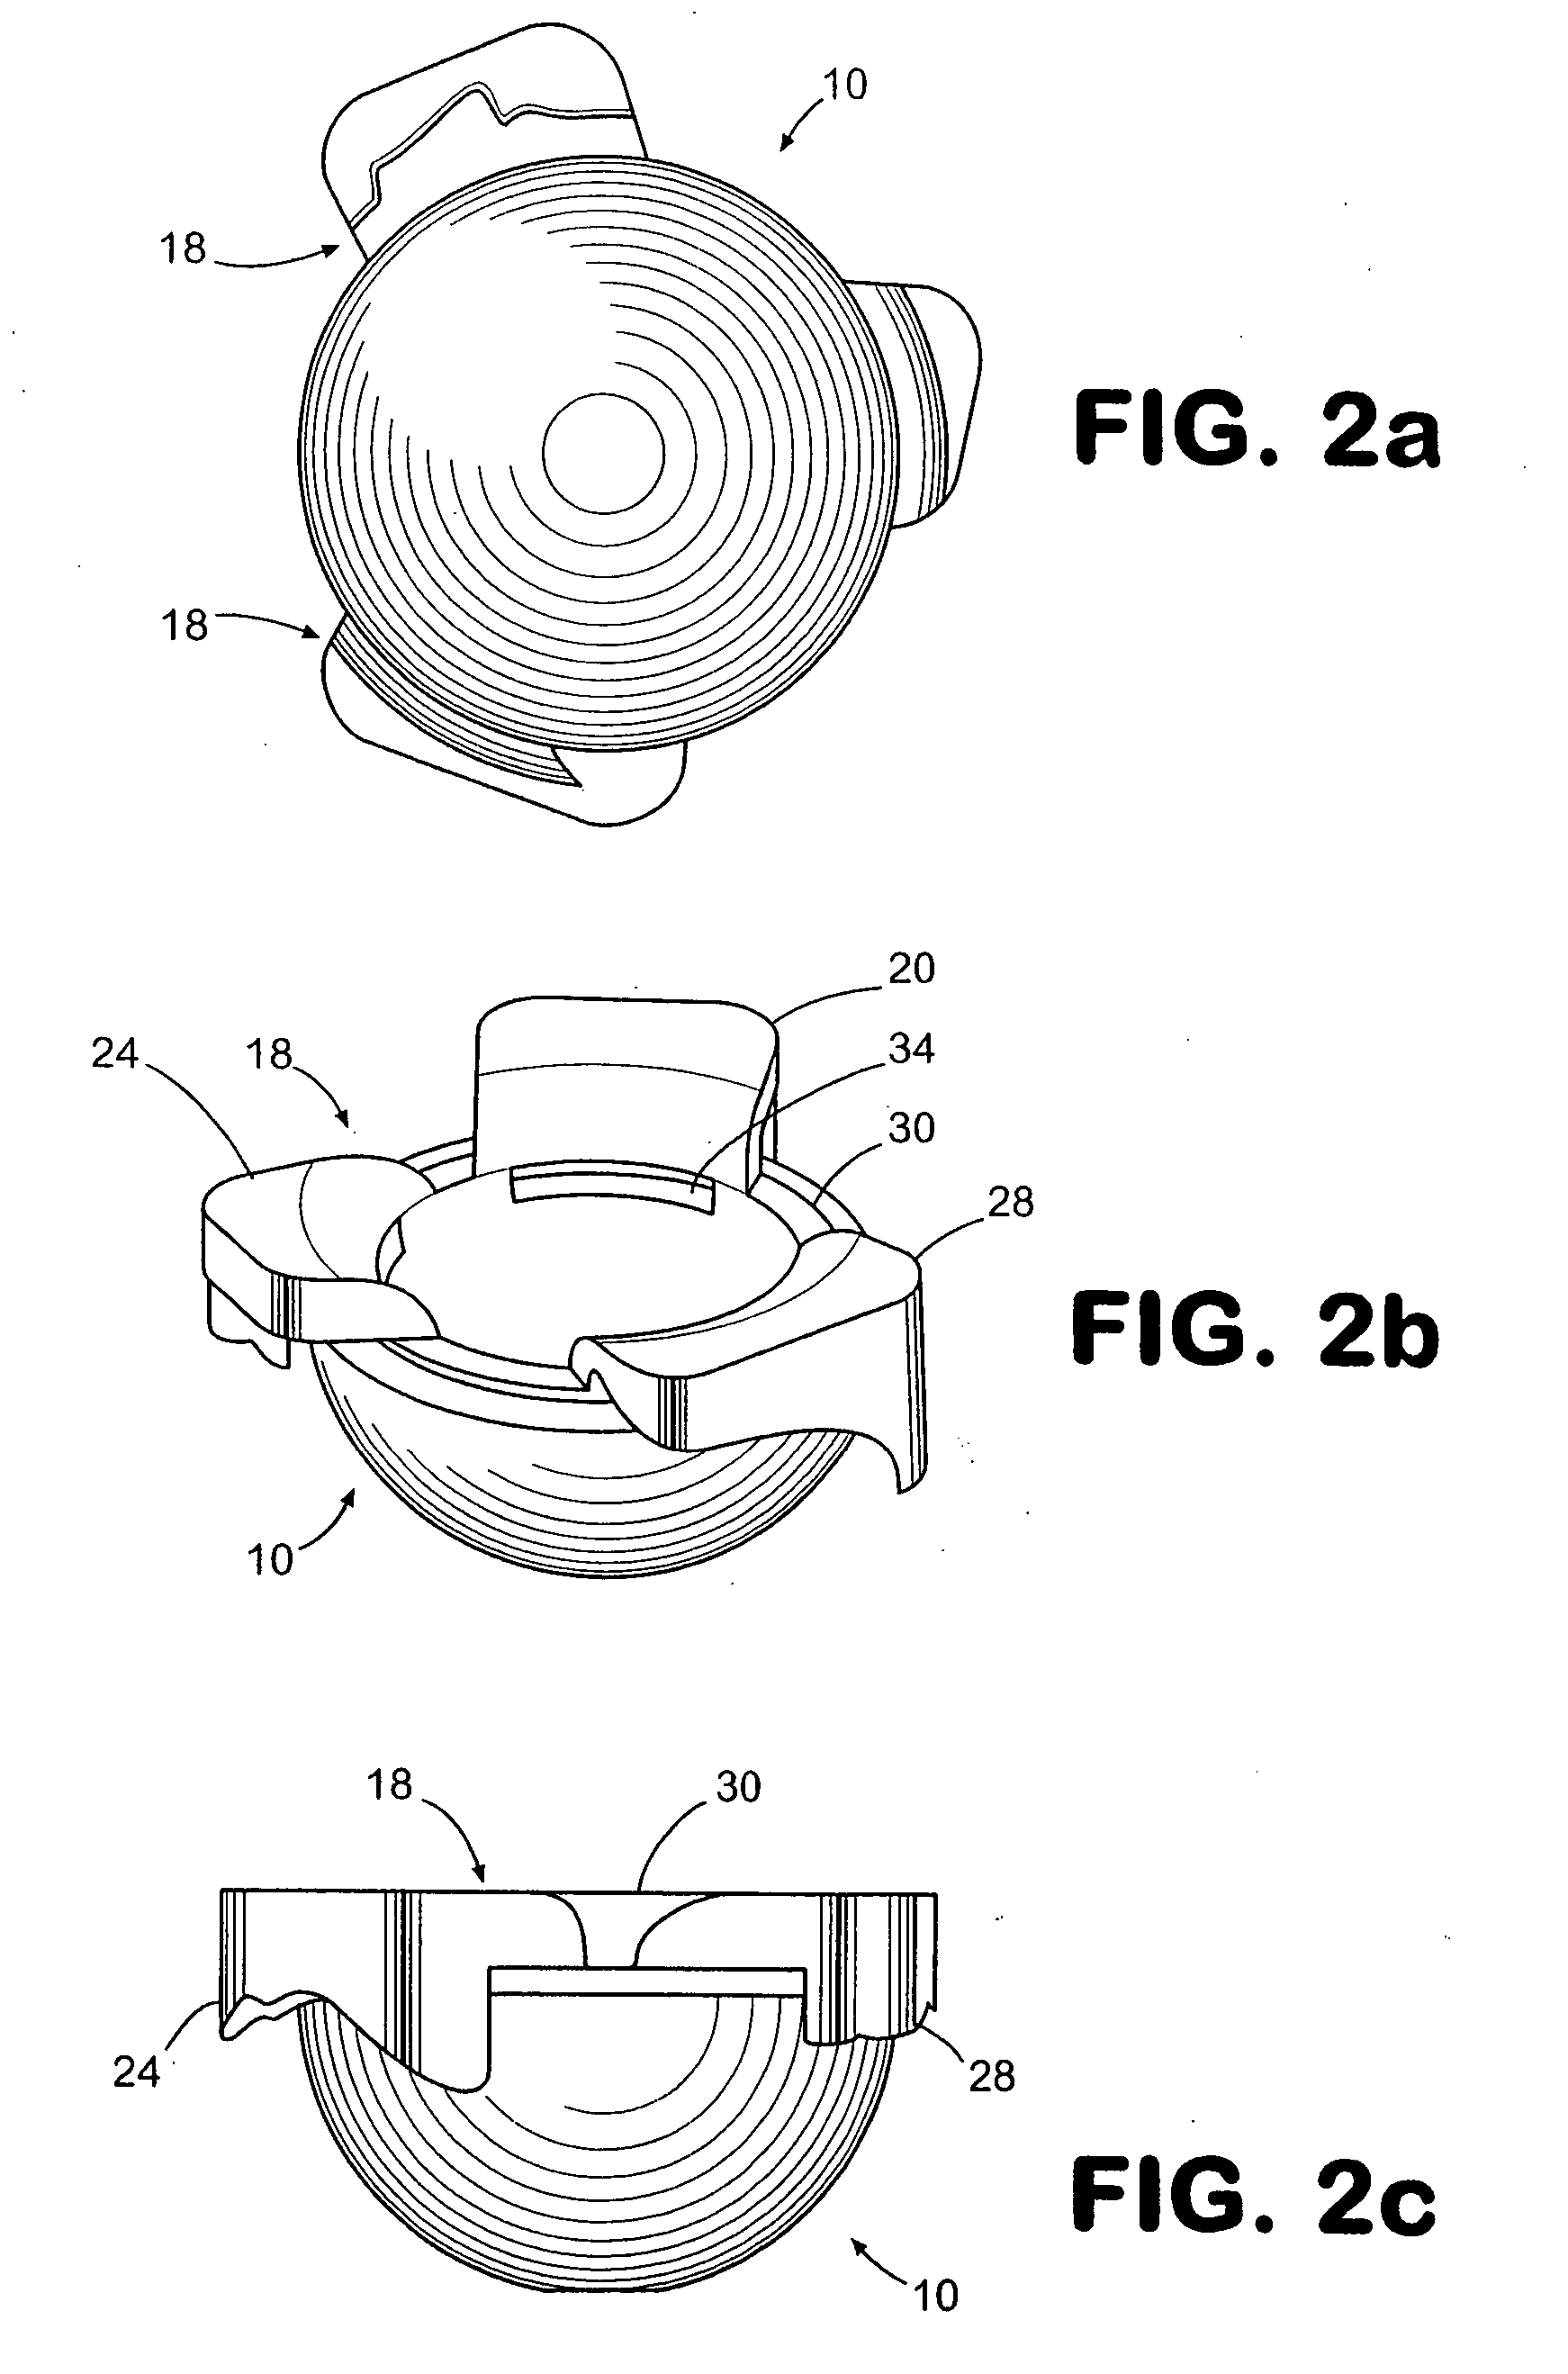 System and method of designing and manufacturing customized instrumentation for accurate implantation of prosthesis by utilizing computed tomography data